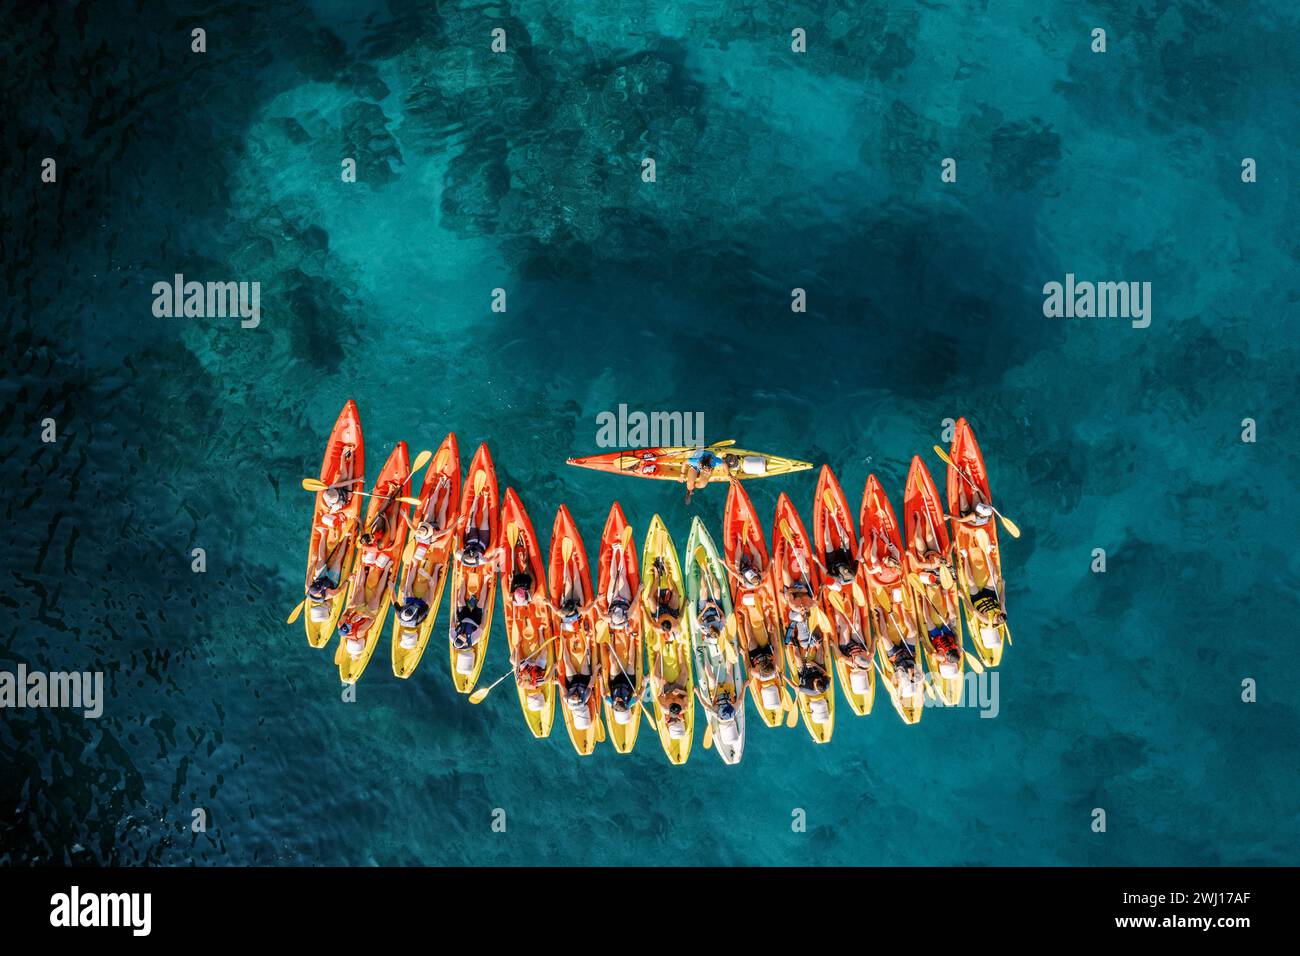 Row of red and yellow kayaks on the turquoise sea. Top view Stock Photo